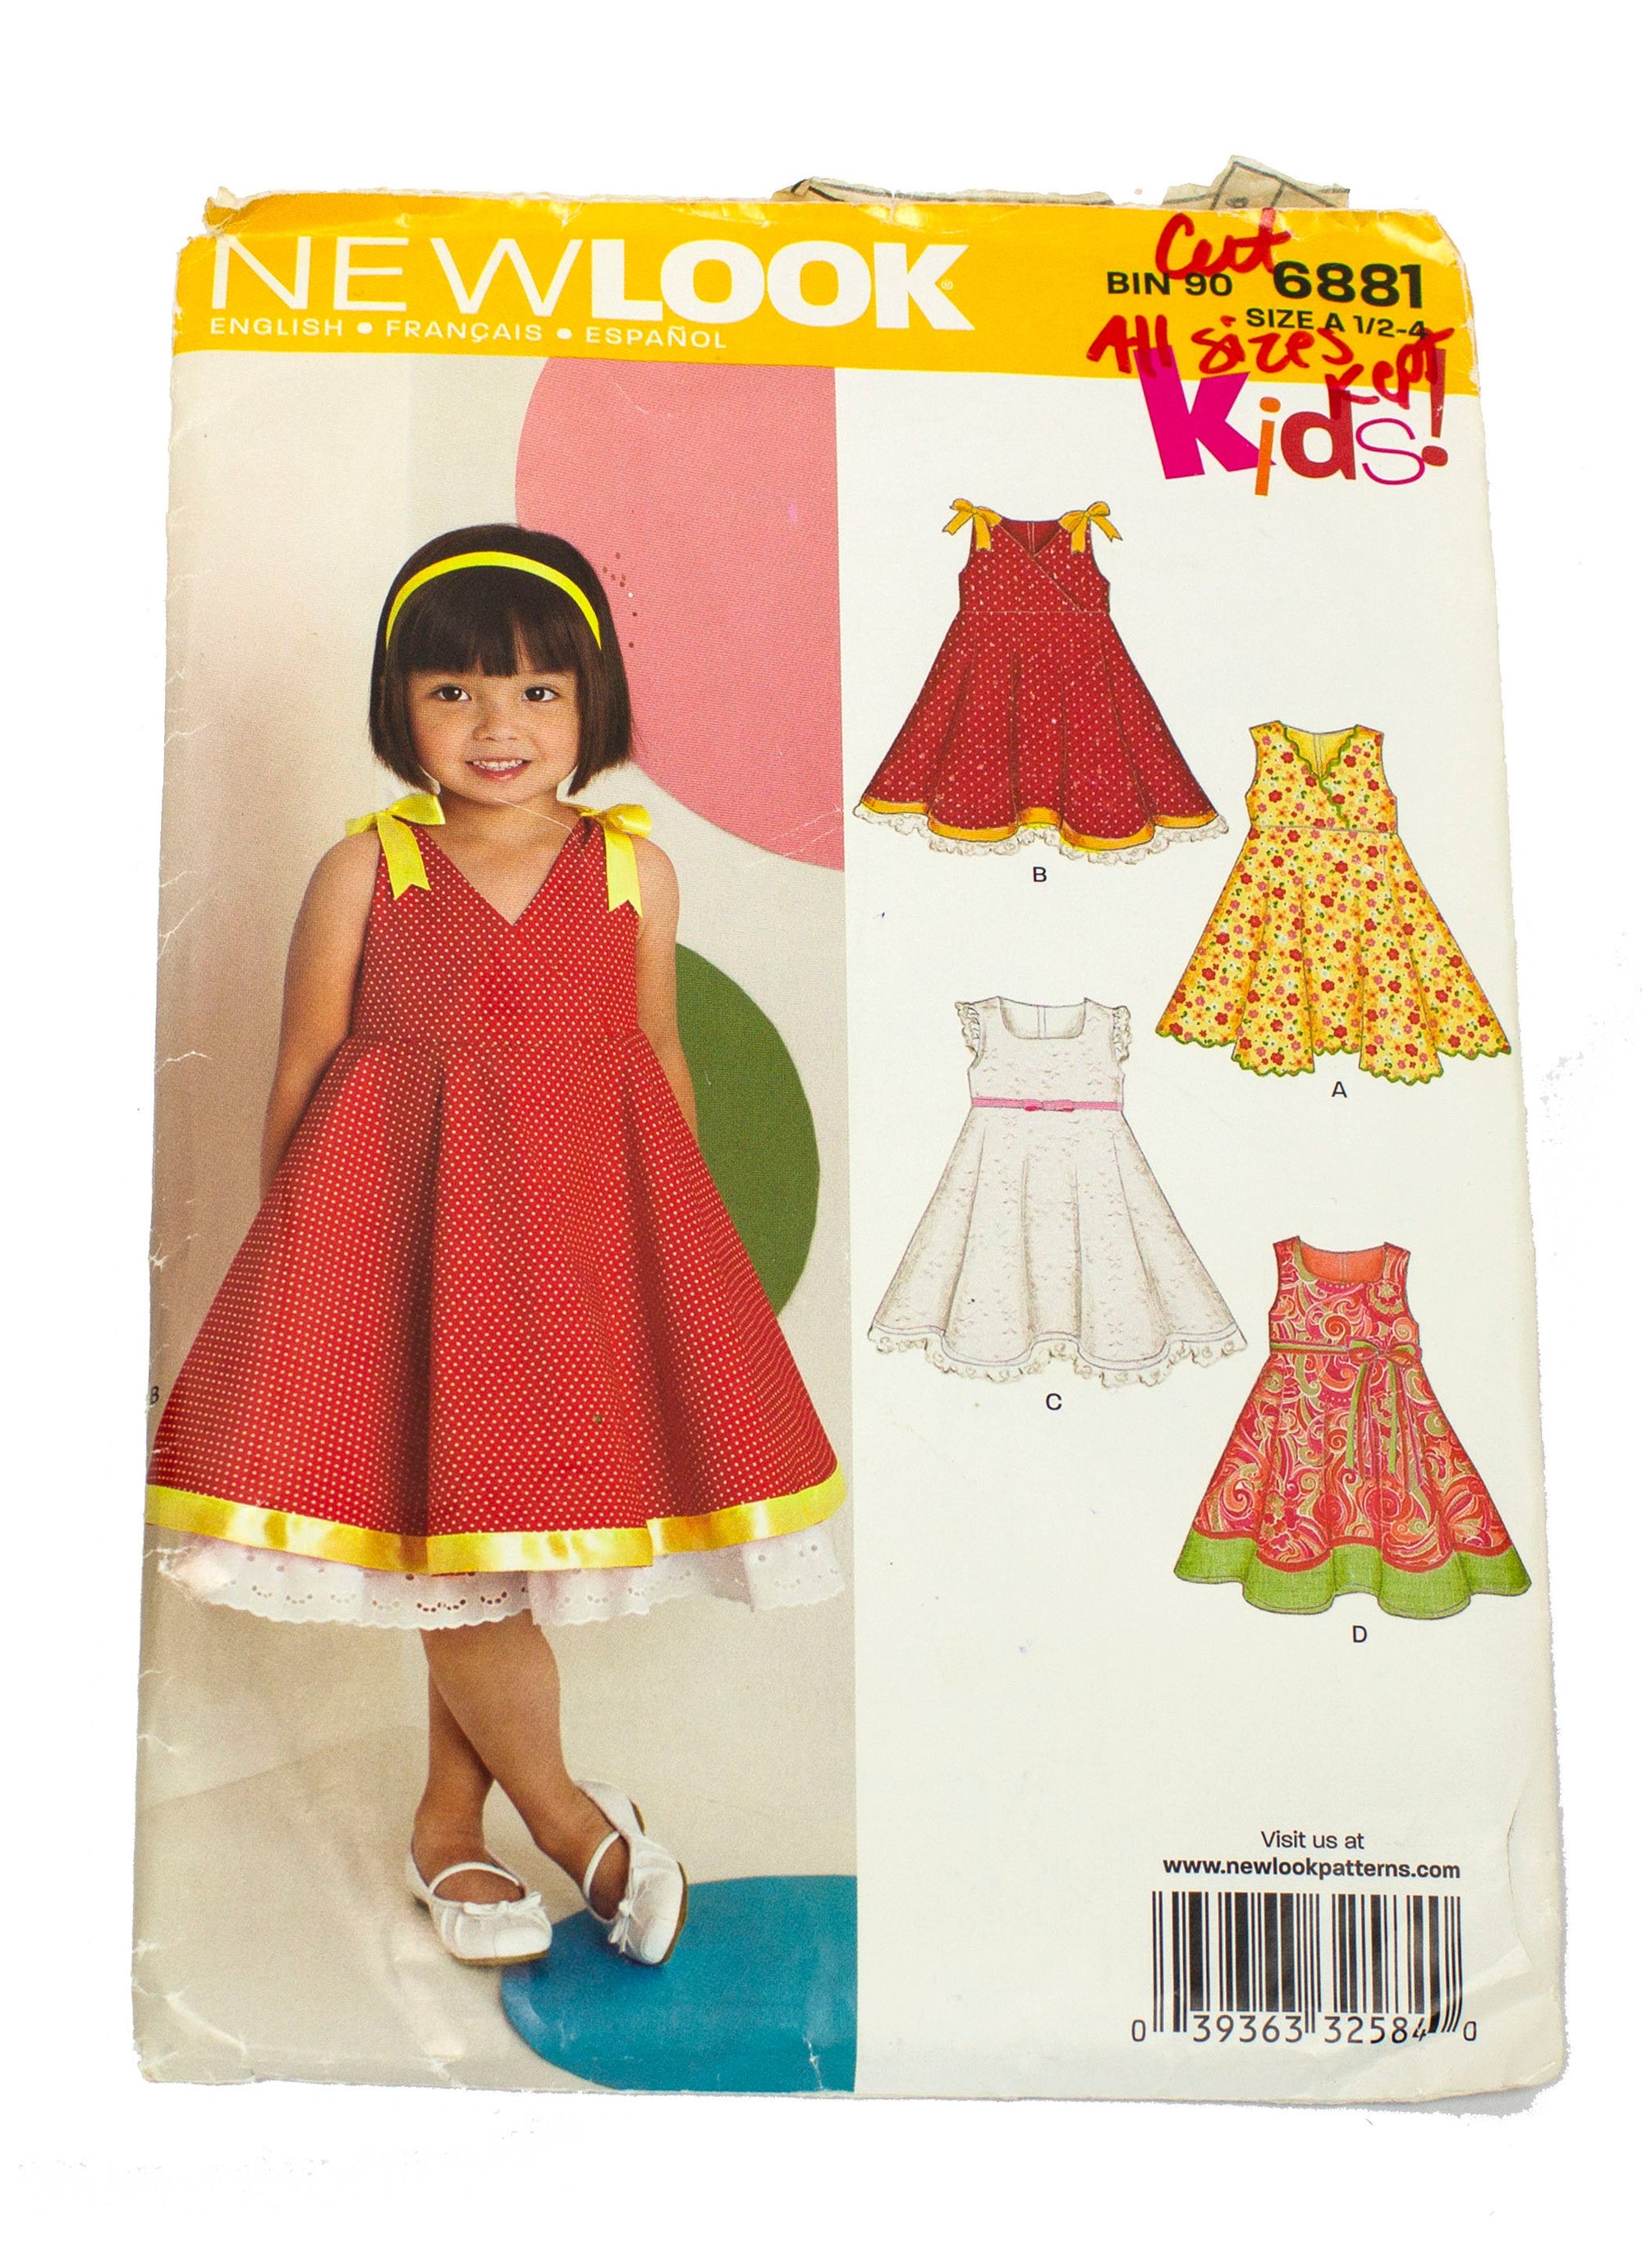 New Look 6881 Toddler's Dress - Sizes 1/2 - 4